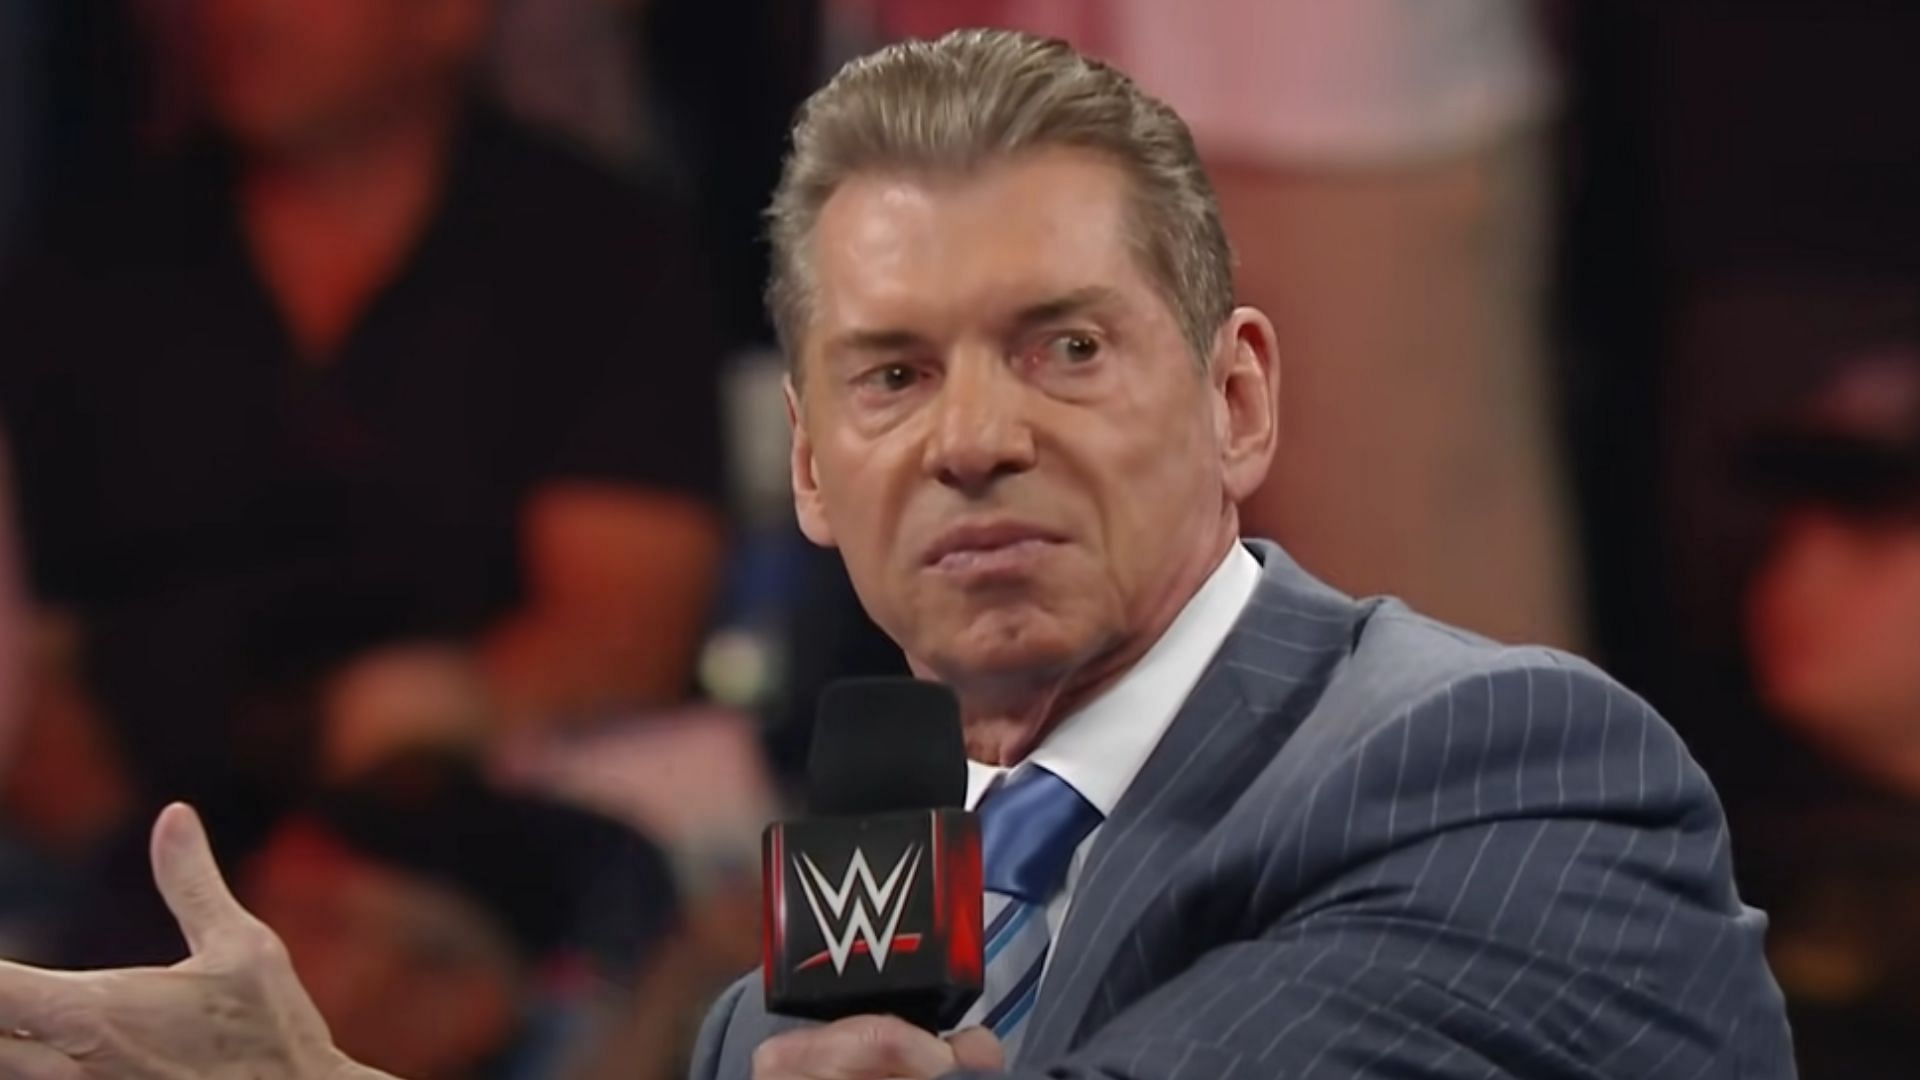 Vince McMahon dislikes rating matches based on in-ring skills.